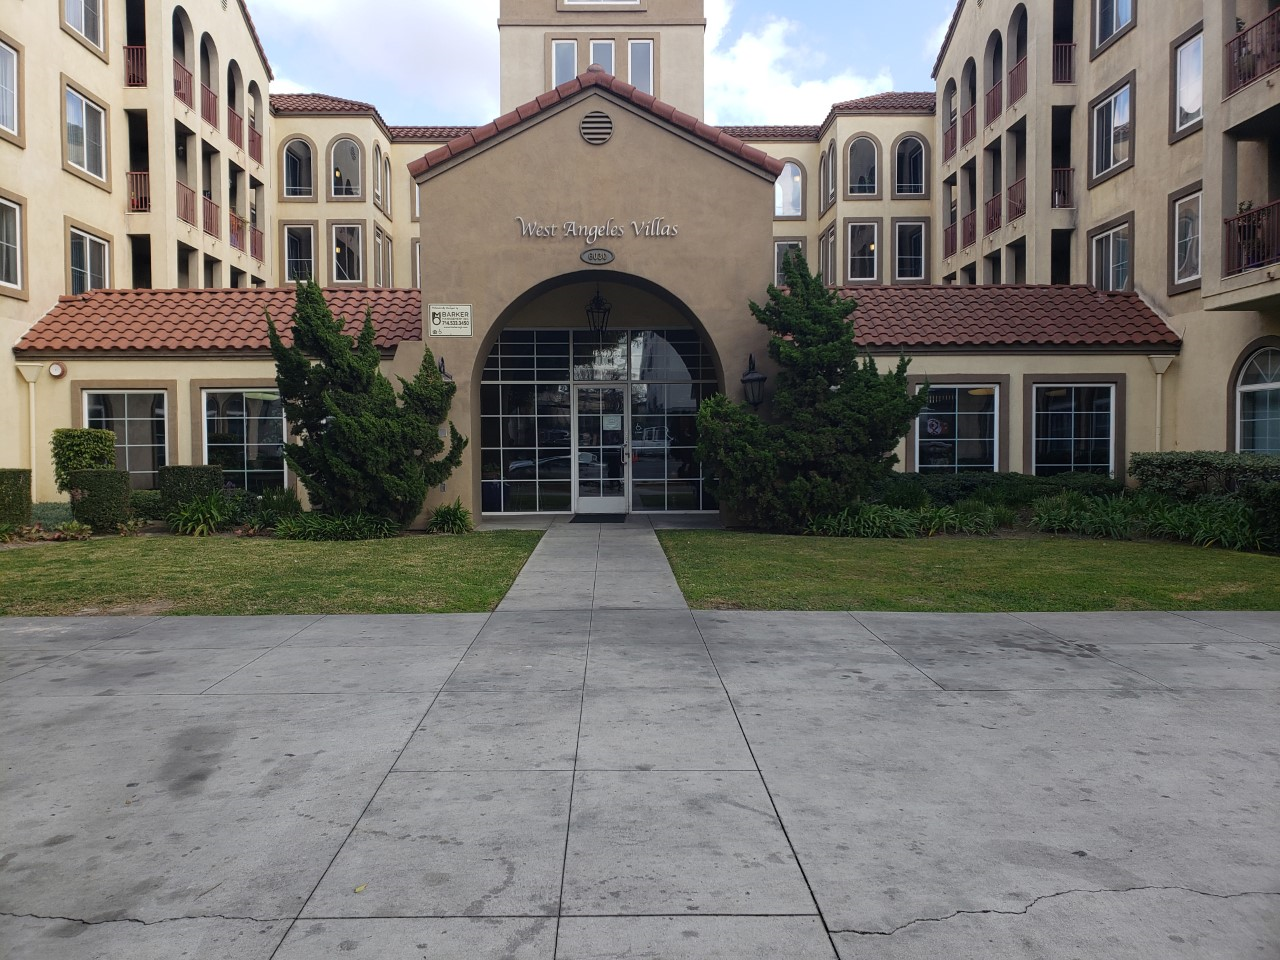 Front view of West Angeles villas. Wide walkway leading up to buildings front entrance. on either side of walkway there is a large area of grass with trees along building.